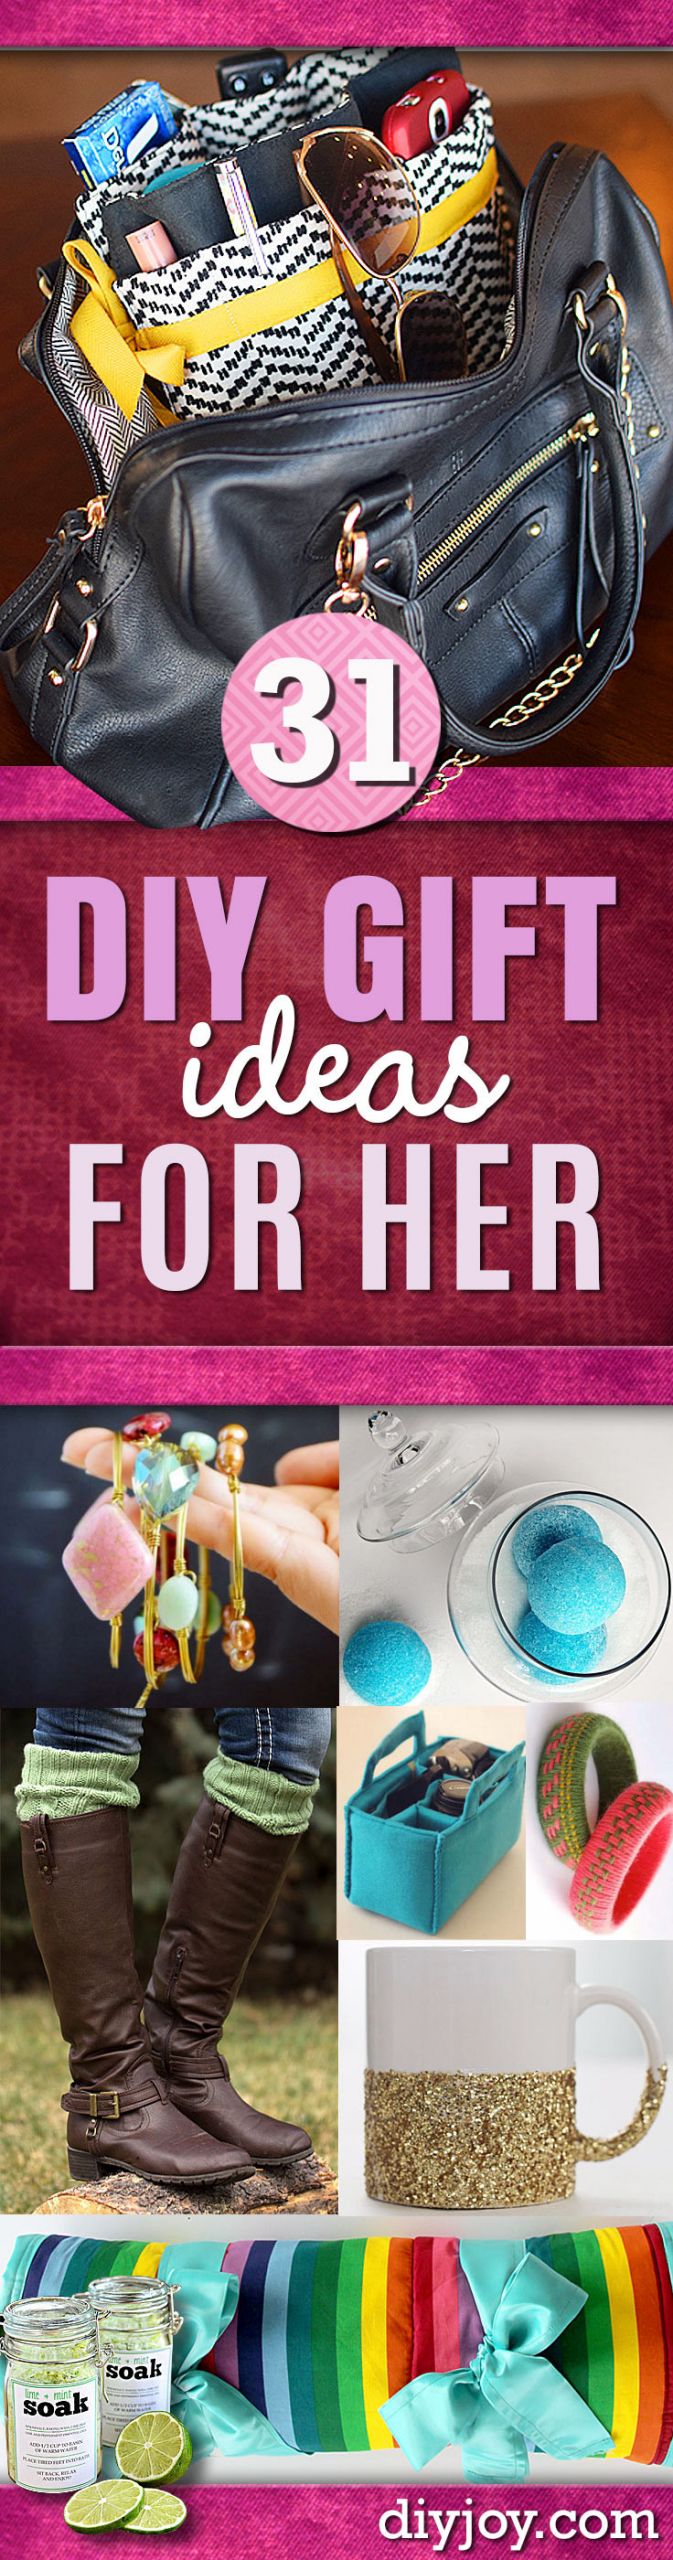 DIY Gift For Her
 Super Special DIY Gift Ideas for Her